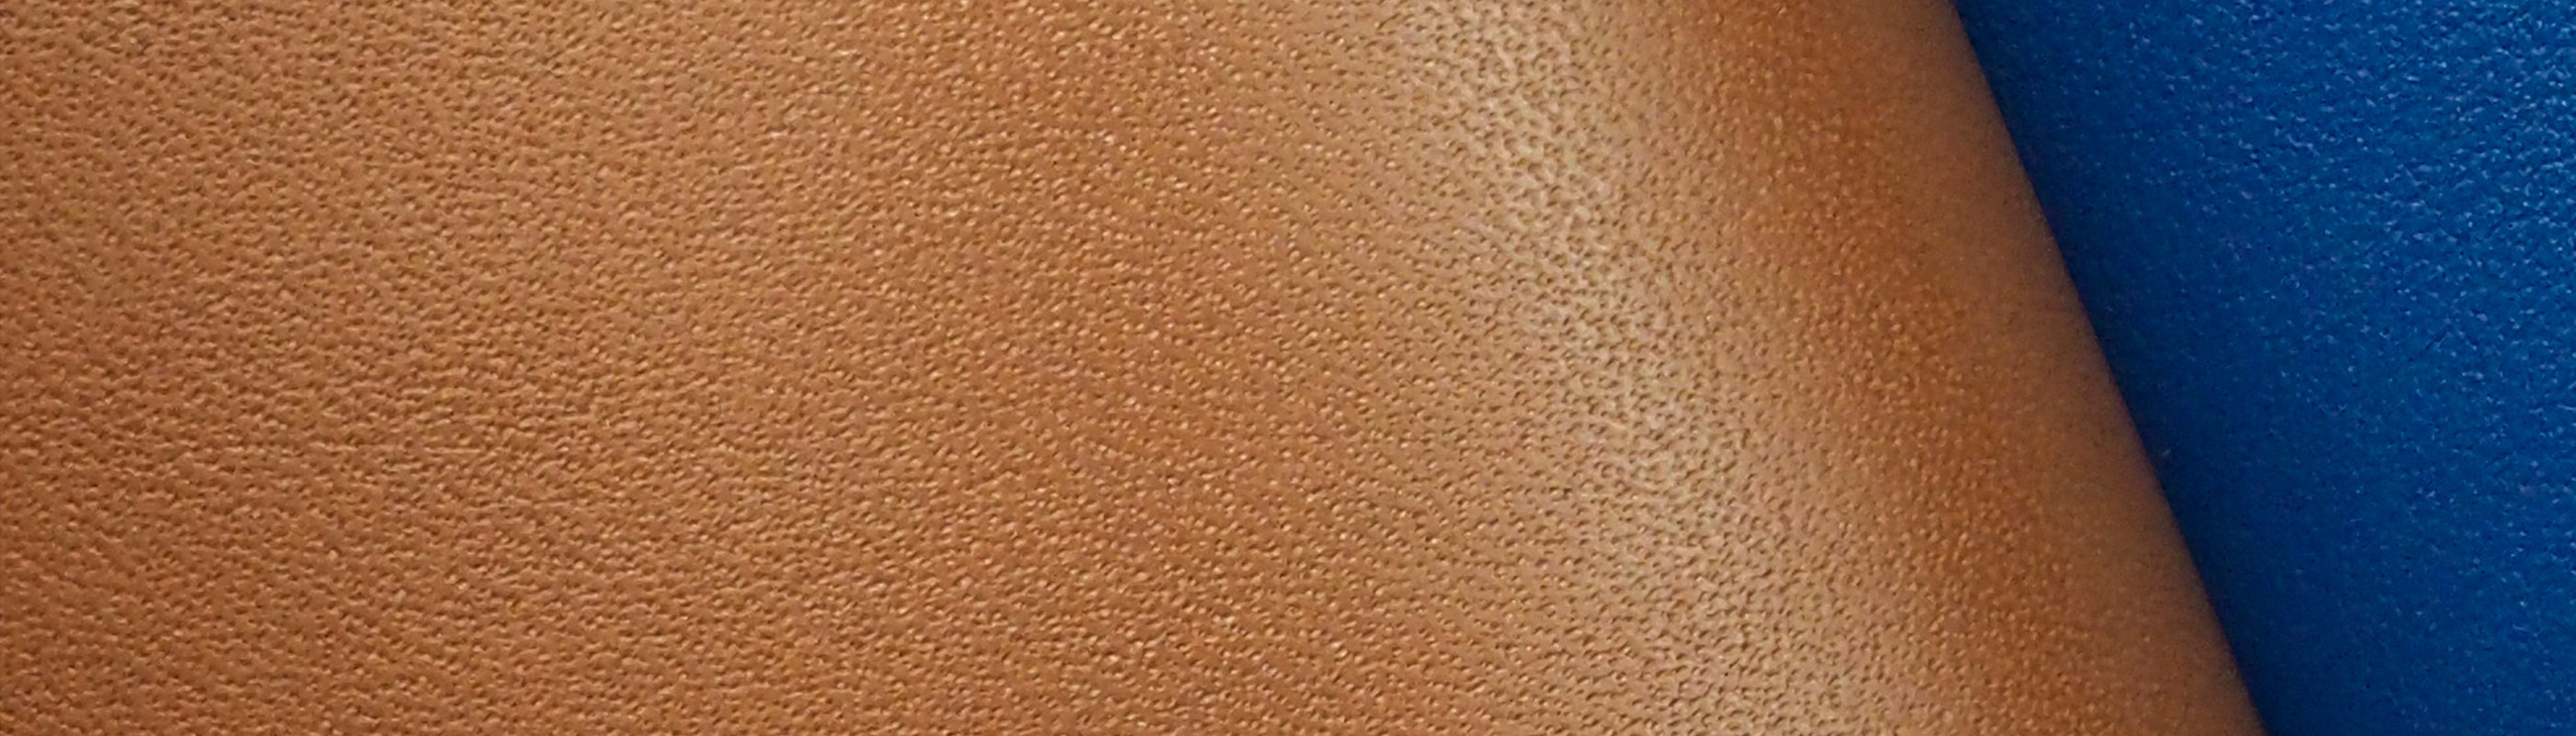 Our smooth full grain leather articles